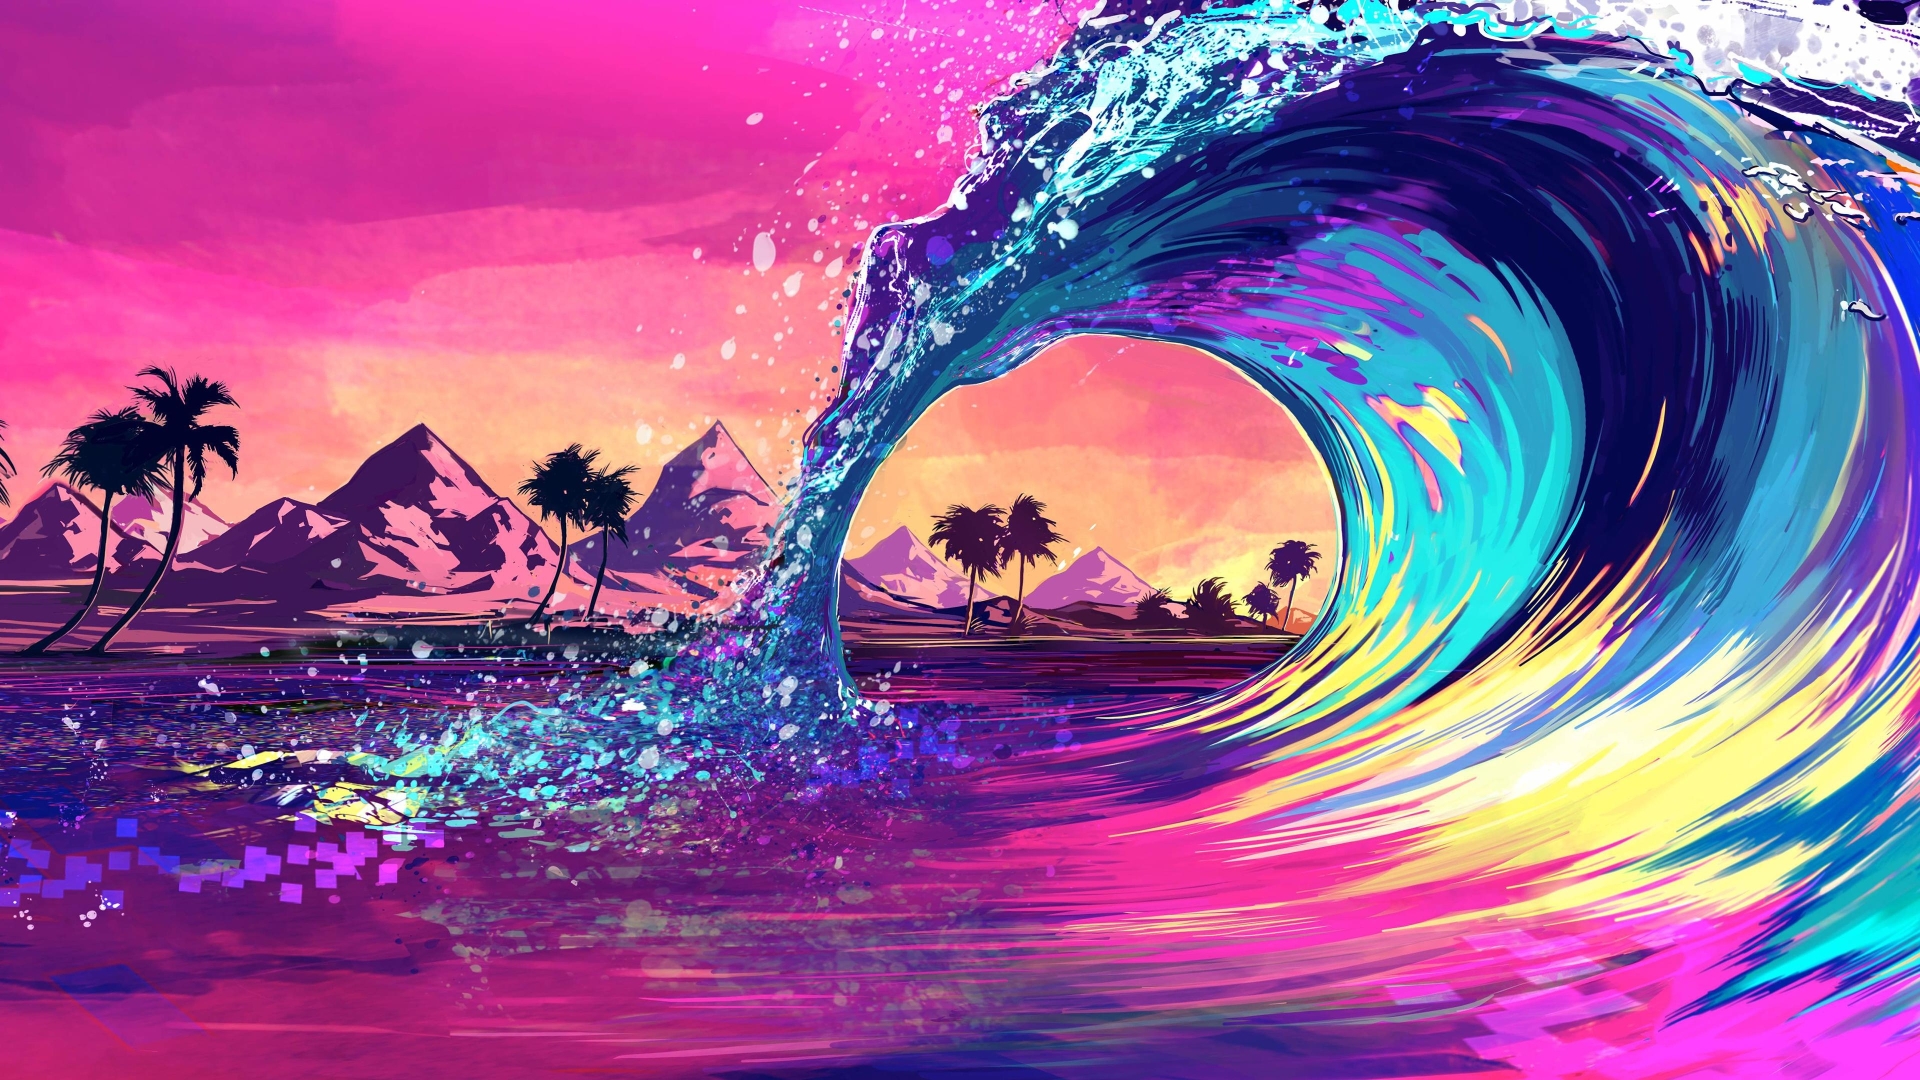 Colorful wave drawings - ultimategross